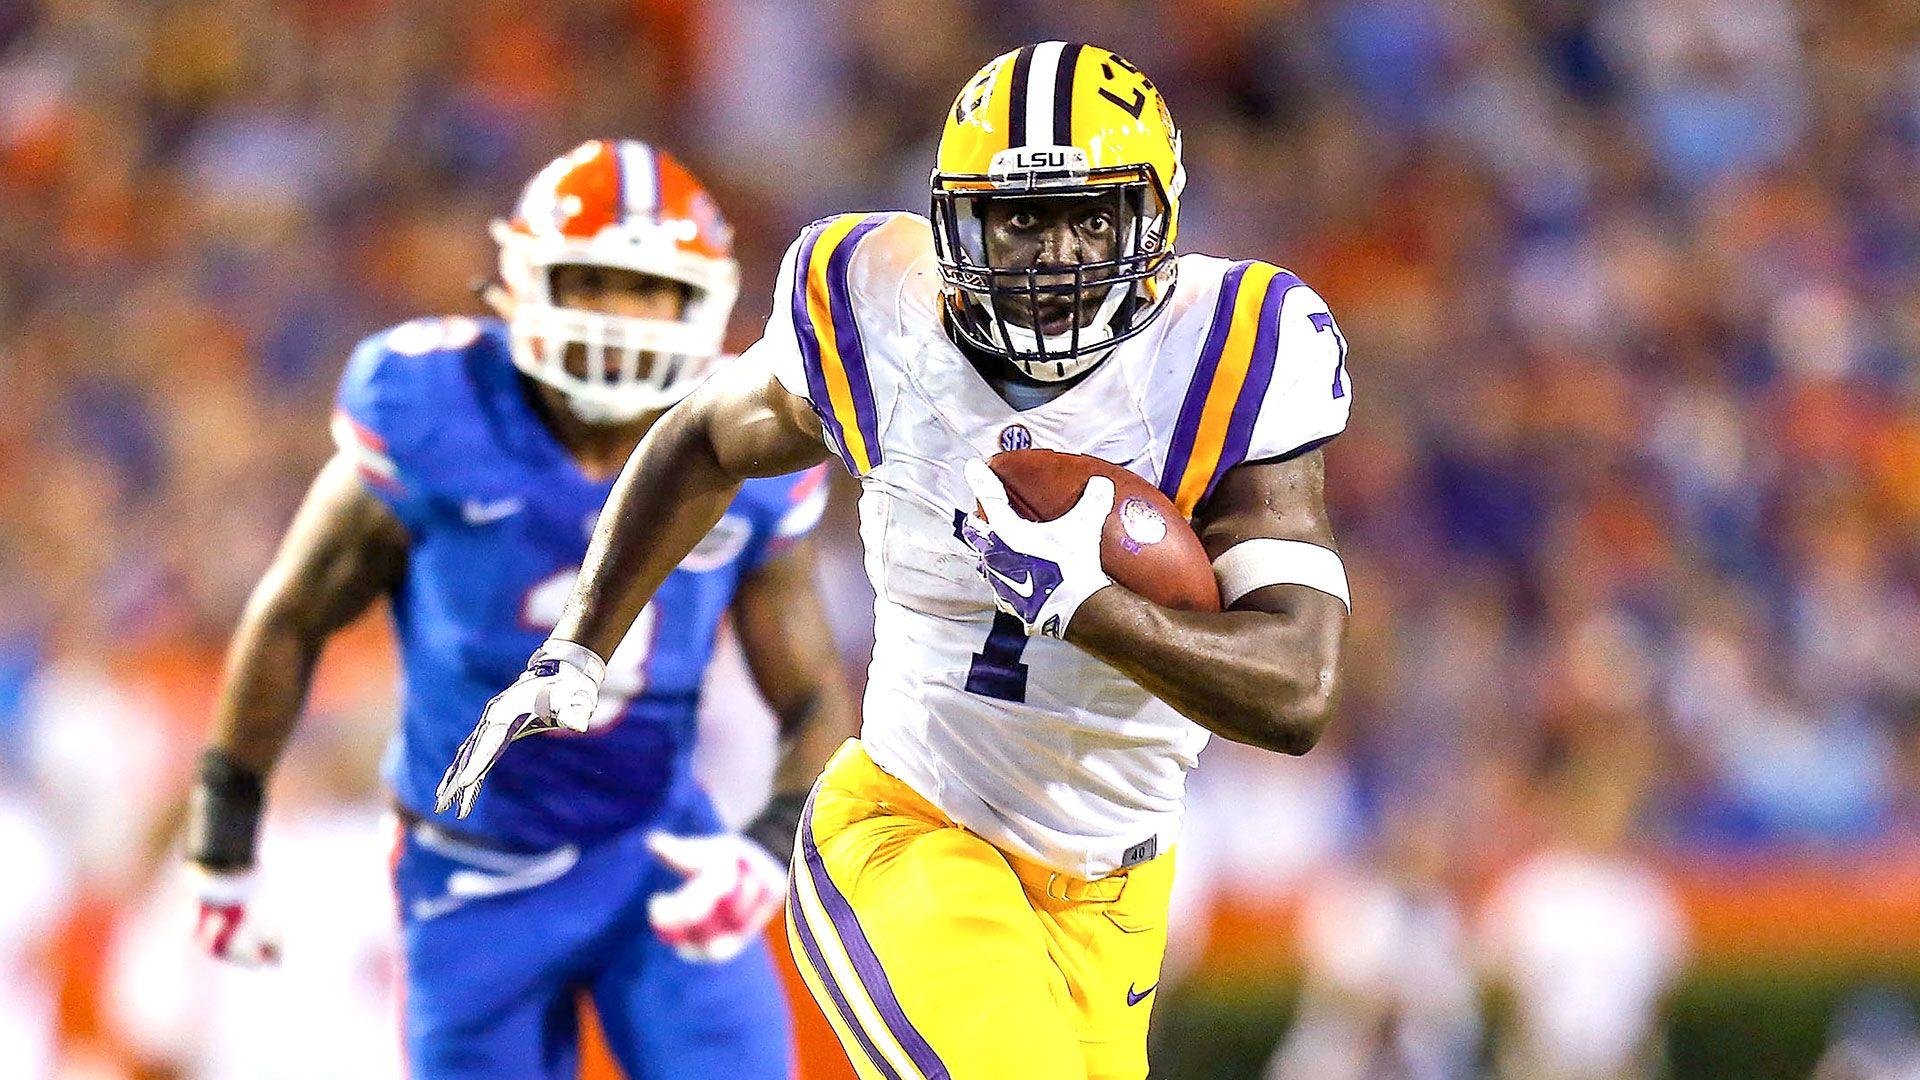 Free Leonard Fournette: It's wrong to keep him from the NFL. NFL